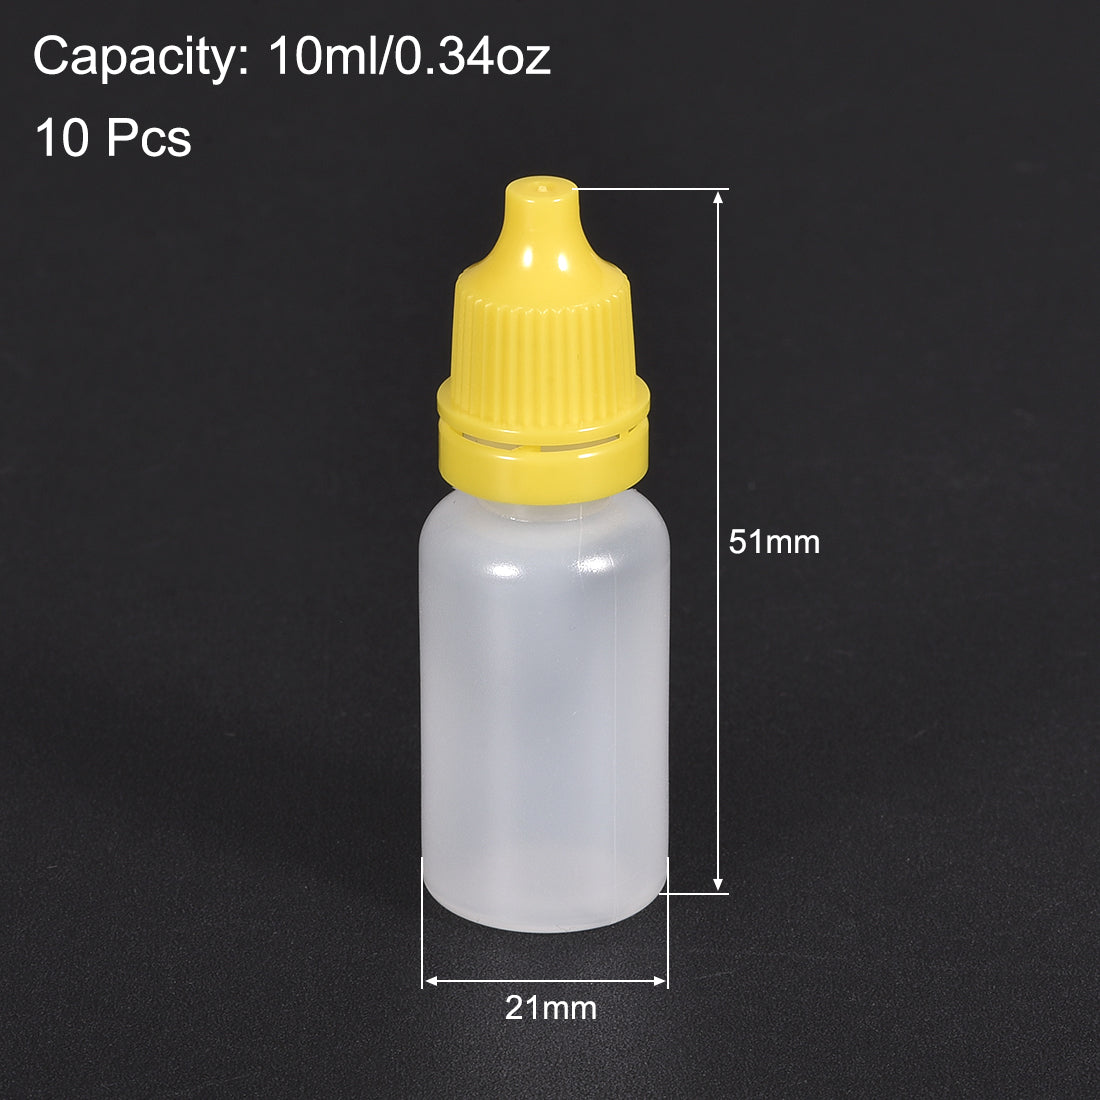 uxcell Uxcell 10ml/0.34 oz Empty Squeezable Dropper Bottle Yellow 10pcs